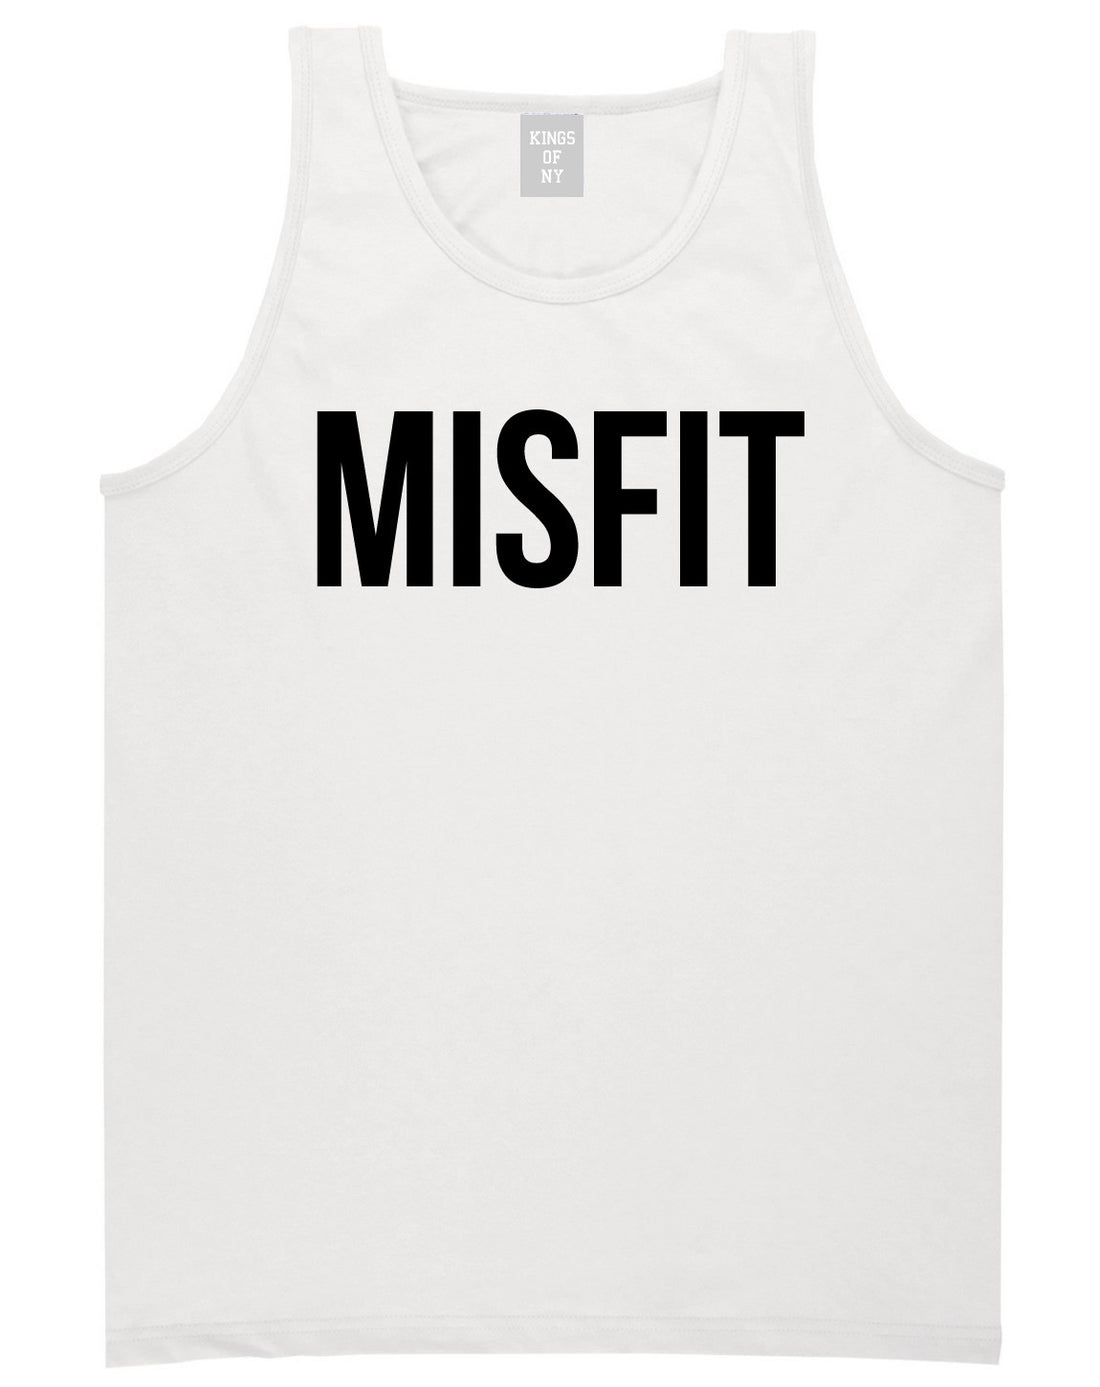 Kings Of NY Misfit Tank Top in White